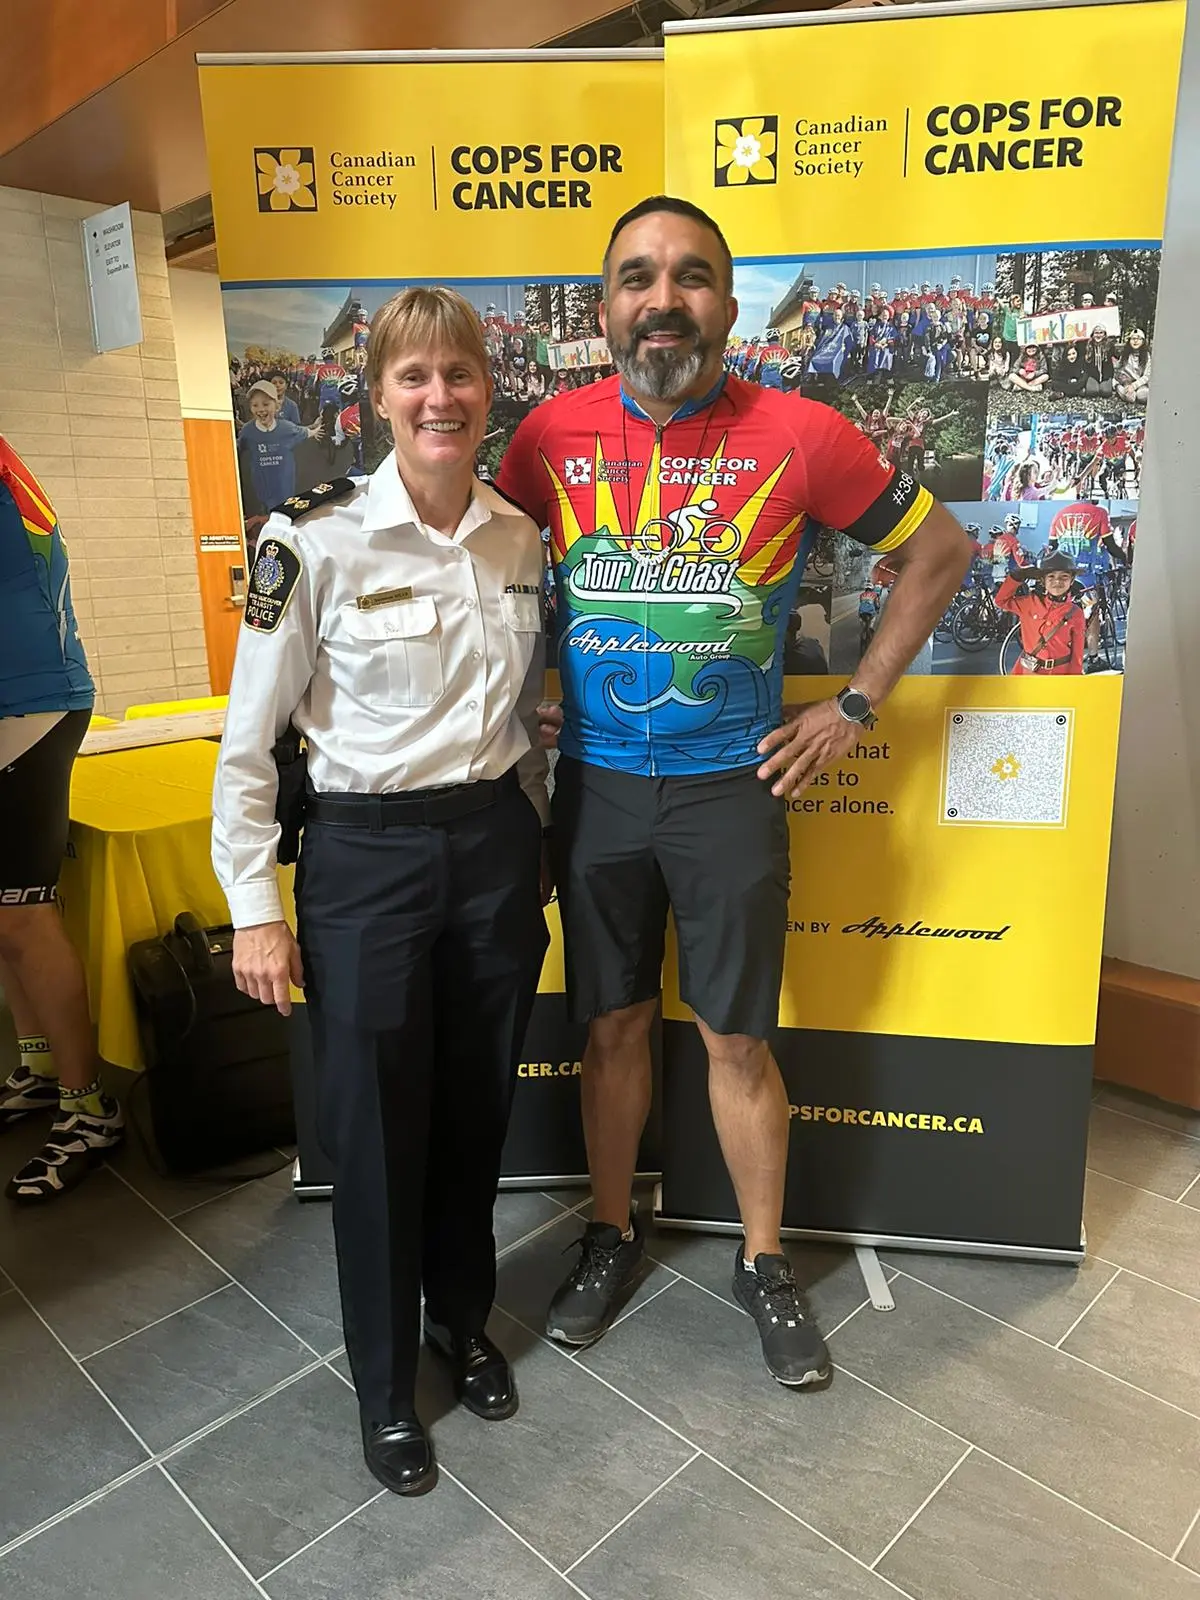 Transit Police Deputy Chief Officer Muir smiles at the camera with Sergeant Dal Deol who is wearing 'Cops for Cancer' gear